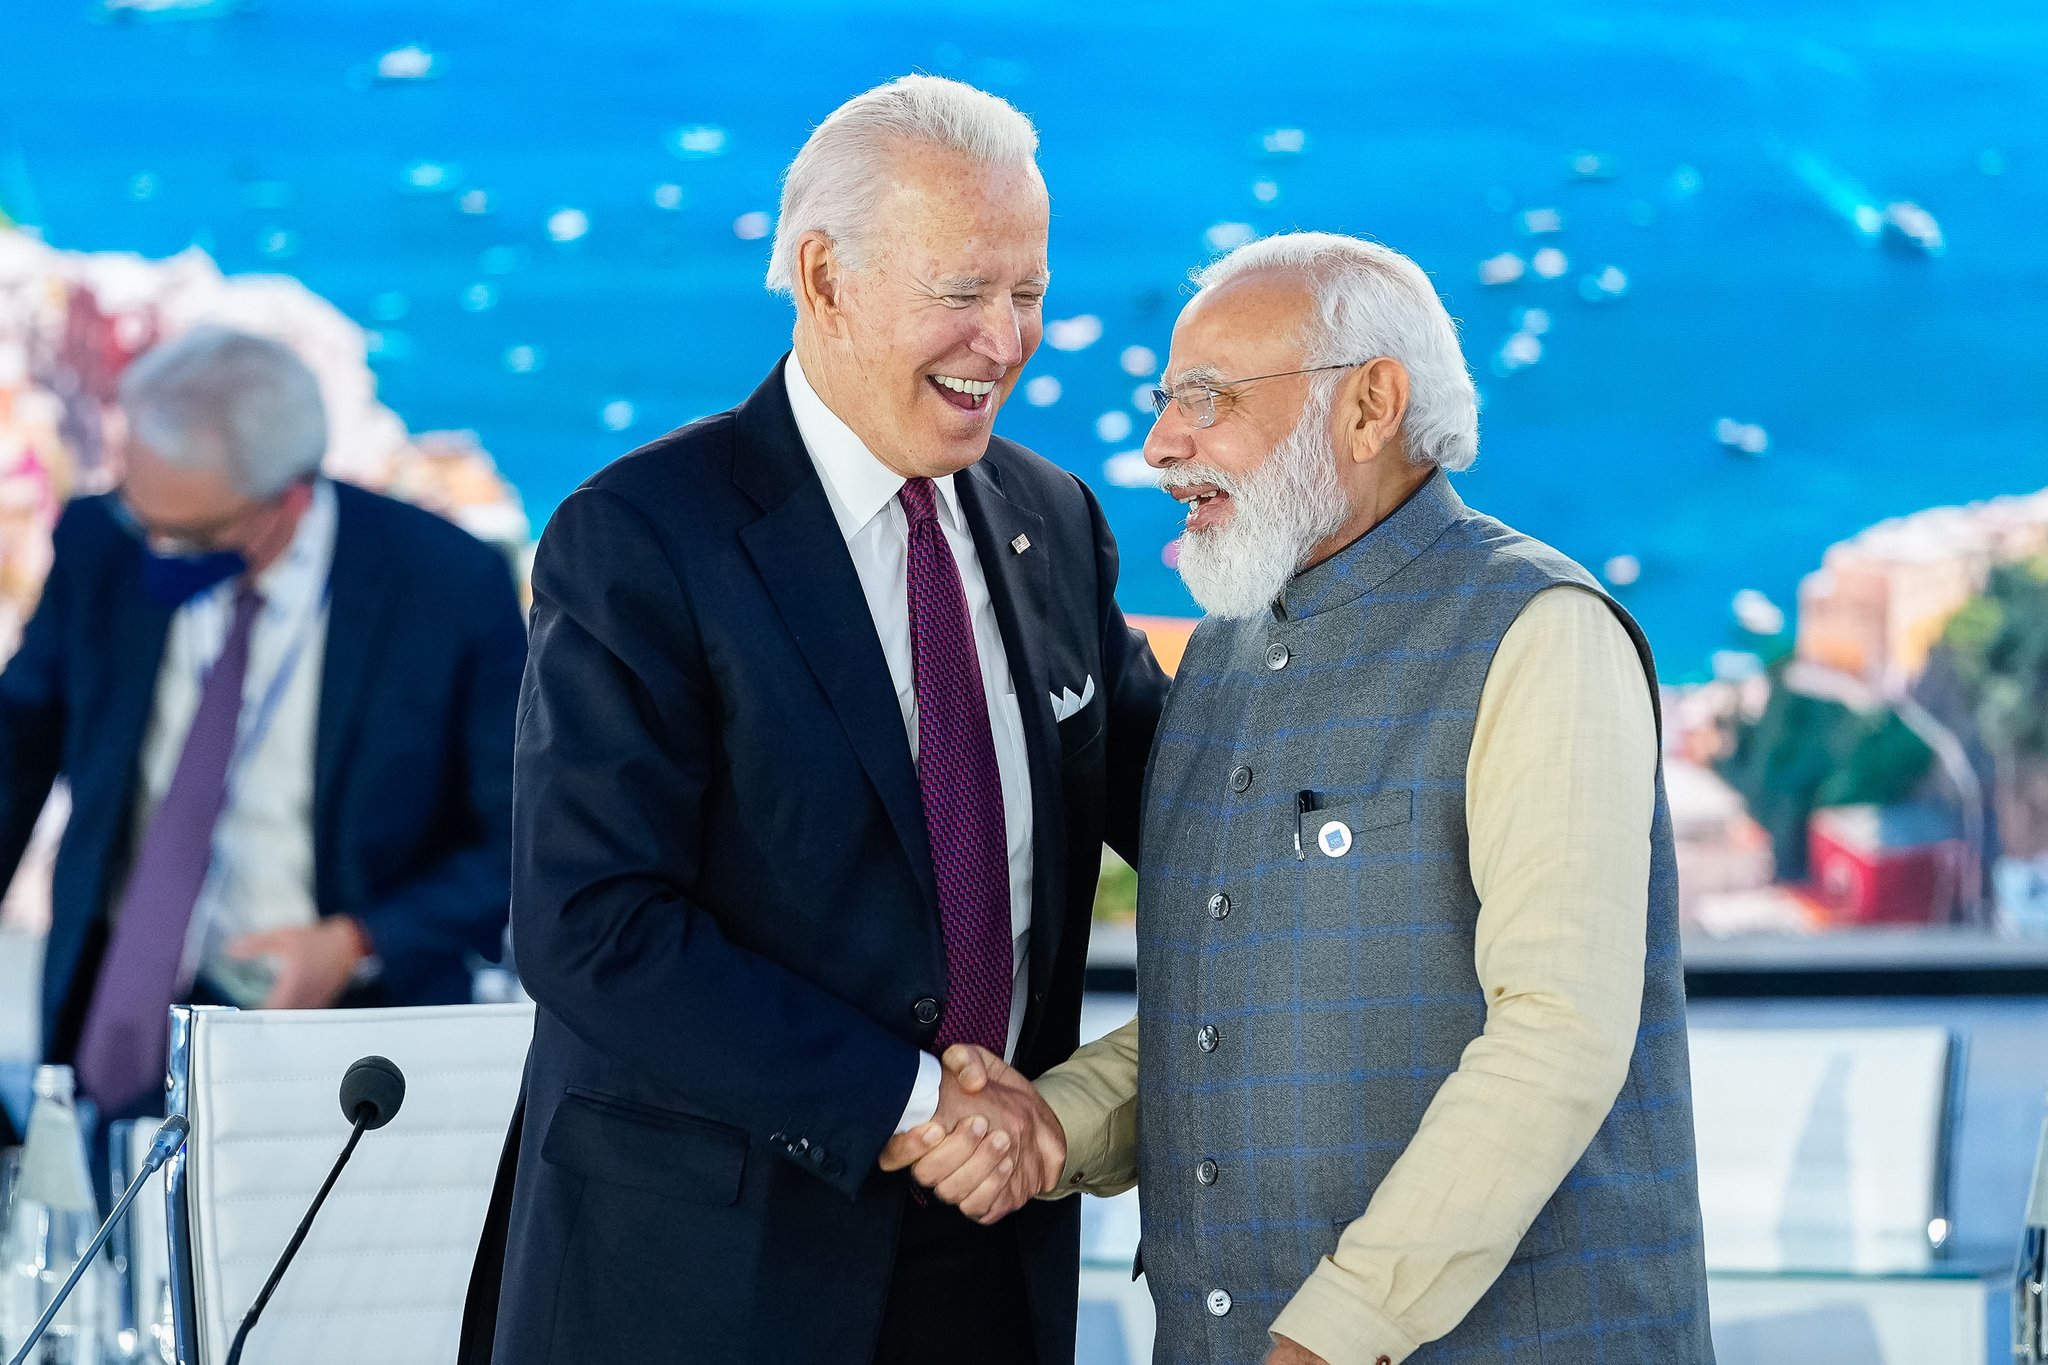 Pakistanis acknowledge Prime Minister Narendra Modi’s successful Washington visit, but with a heavy heart